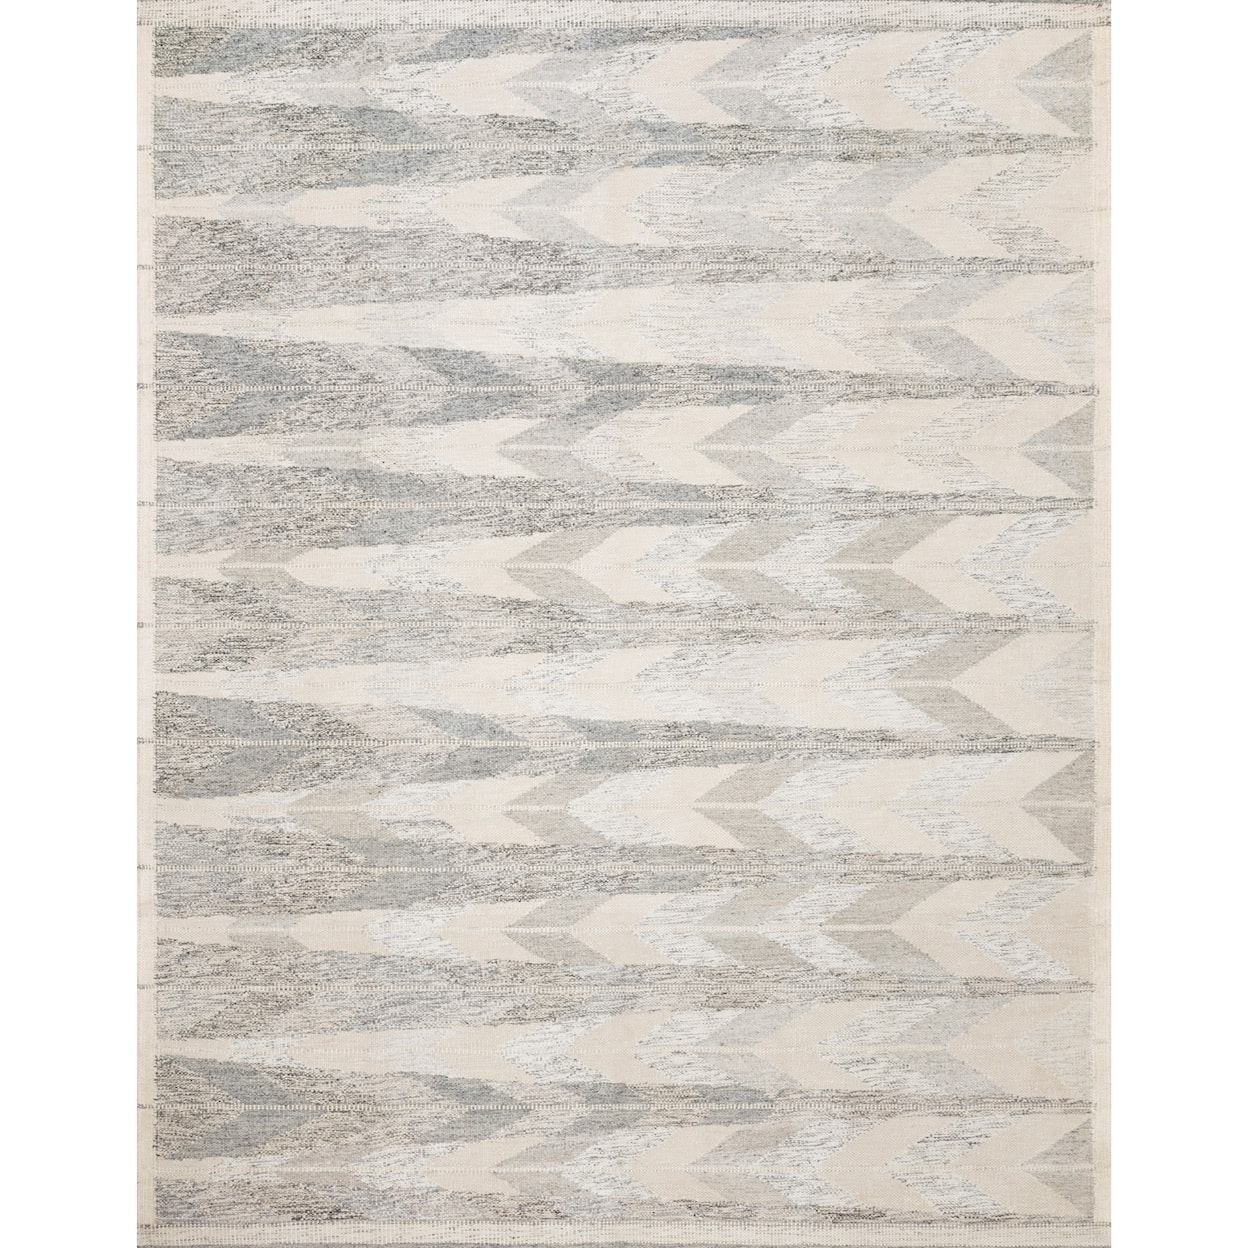 Reeds Rugs Evelina 5'0" x 7'6" Pewter / Silver Rug